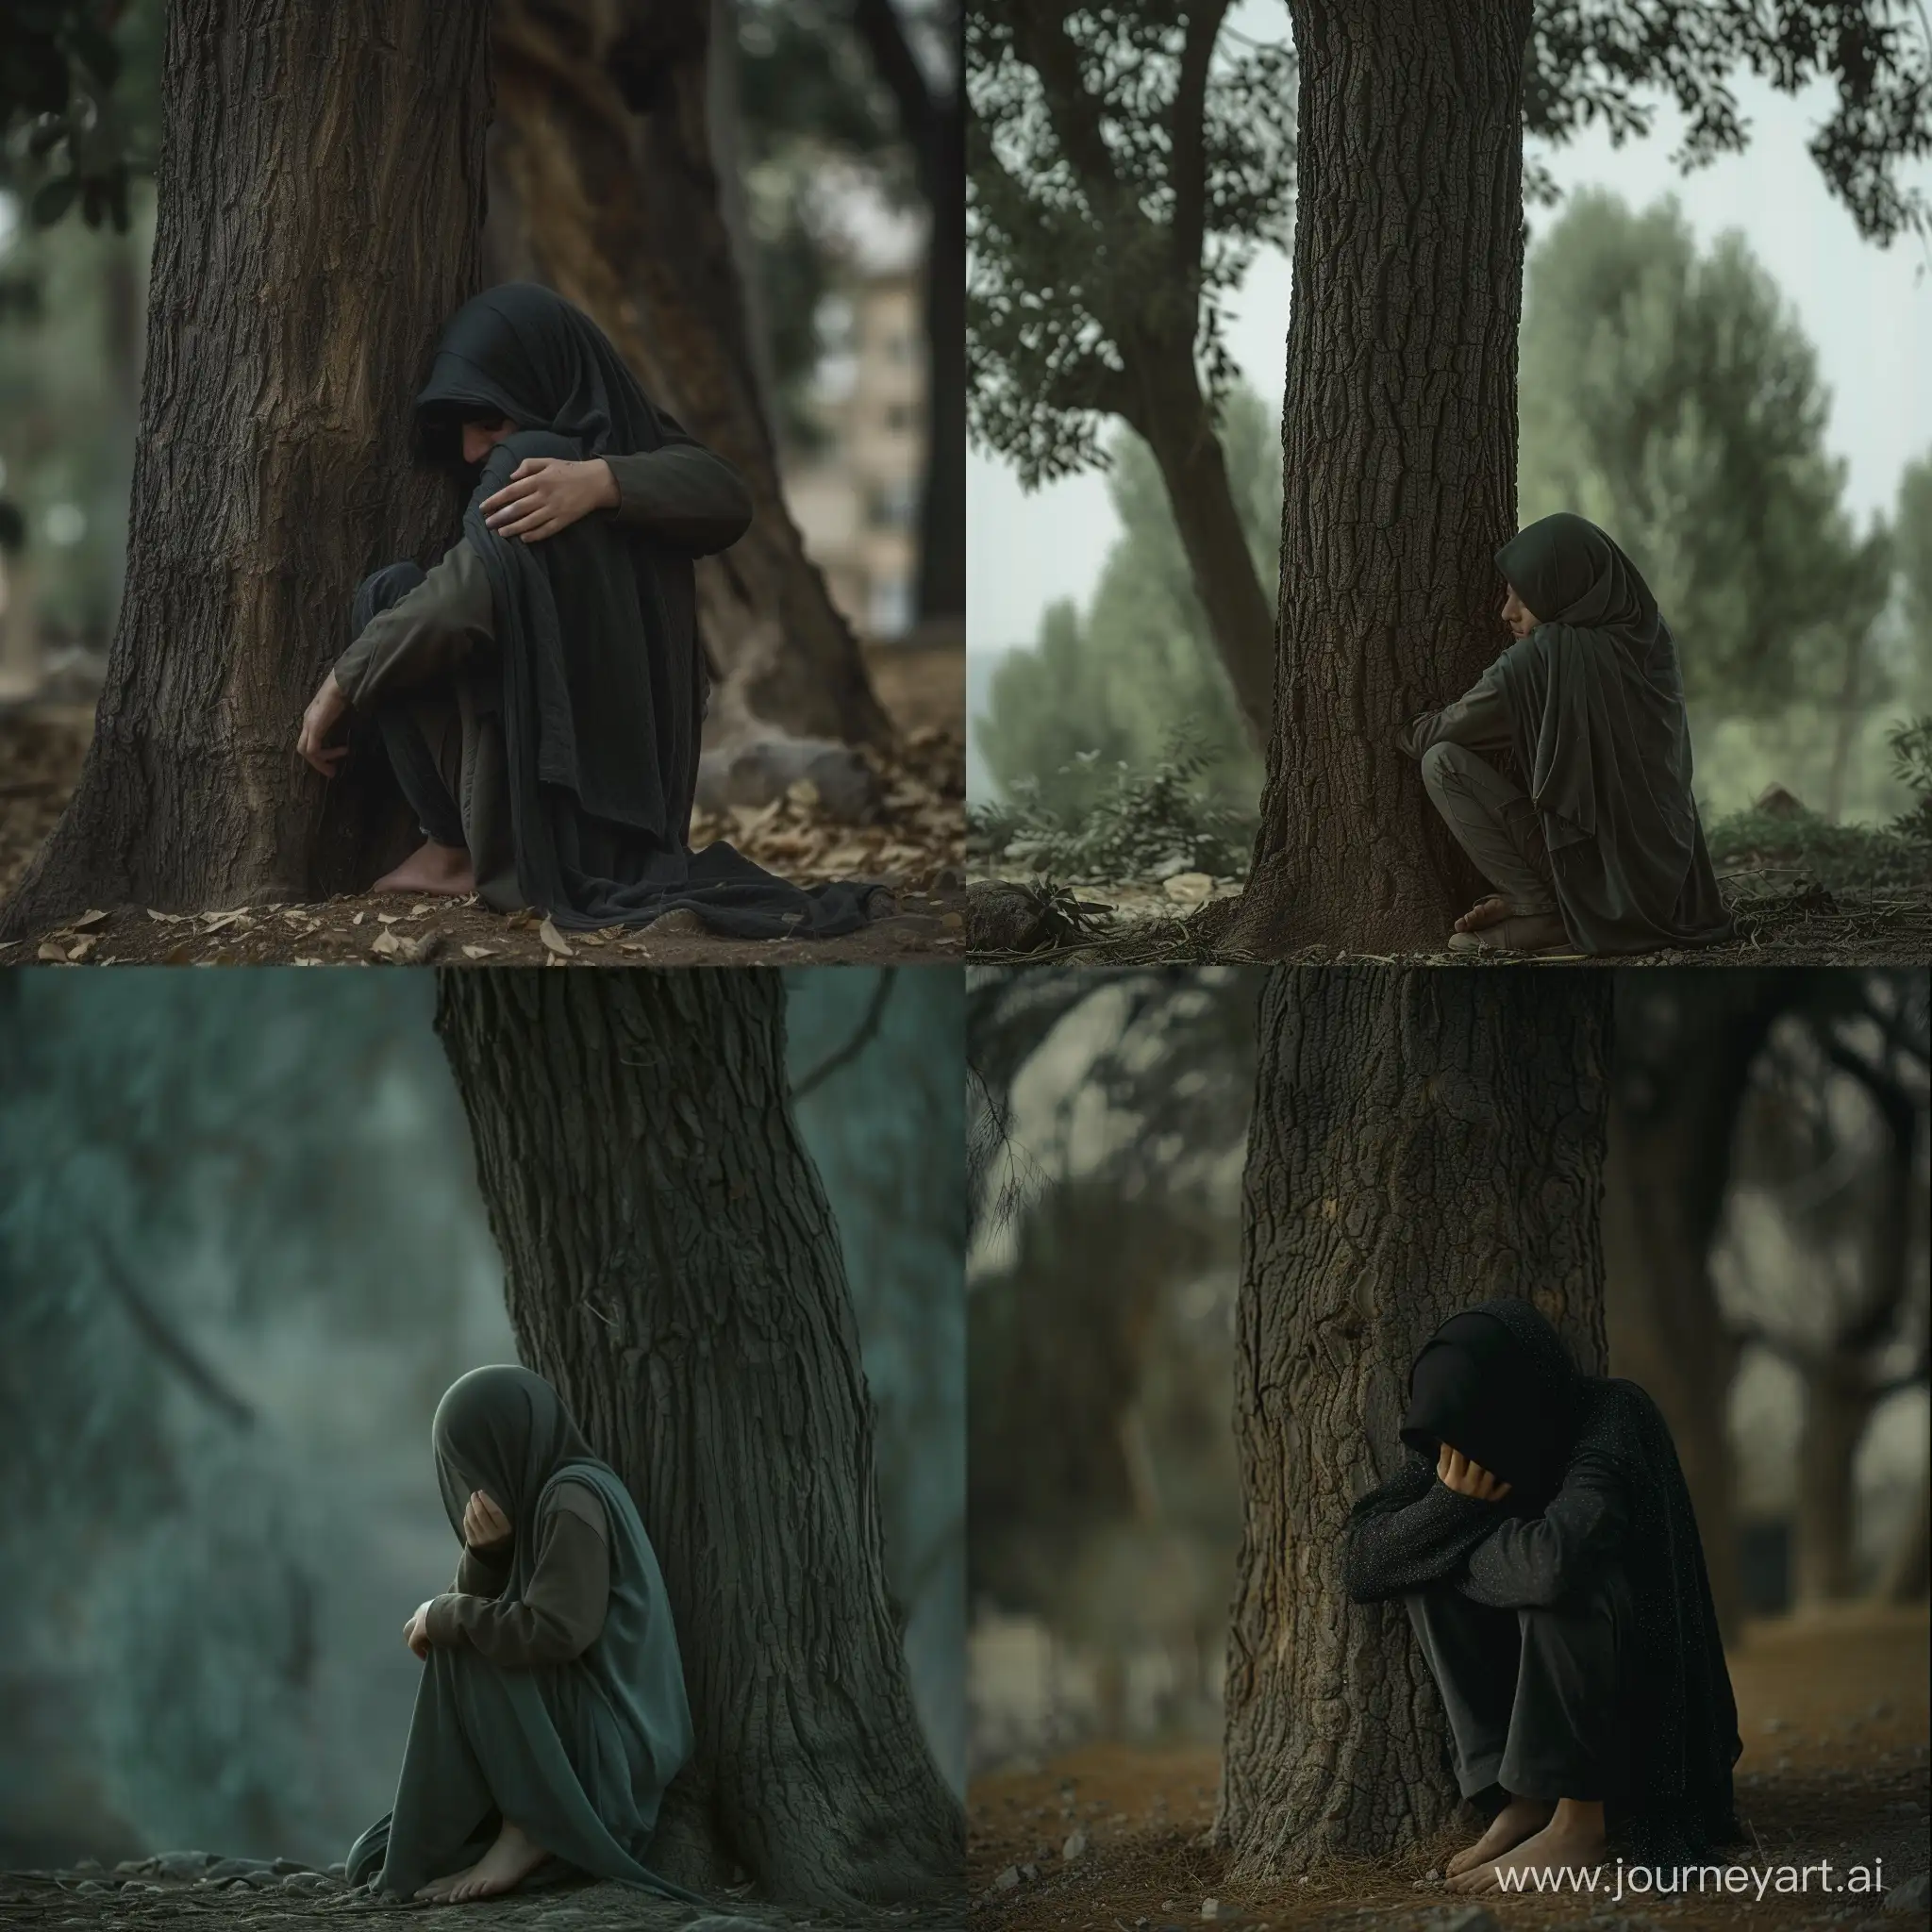 Solemn-Iranian-Girl-in-Hijab-Crying-by-the-Tree